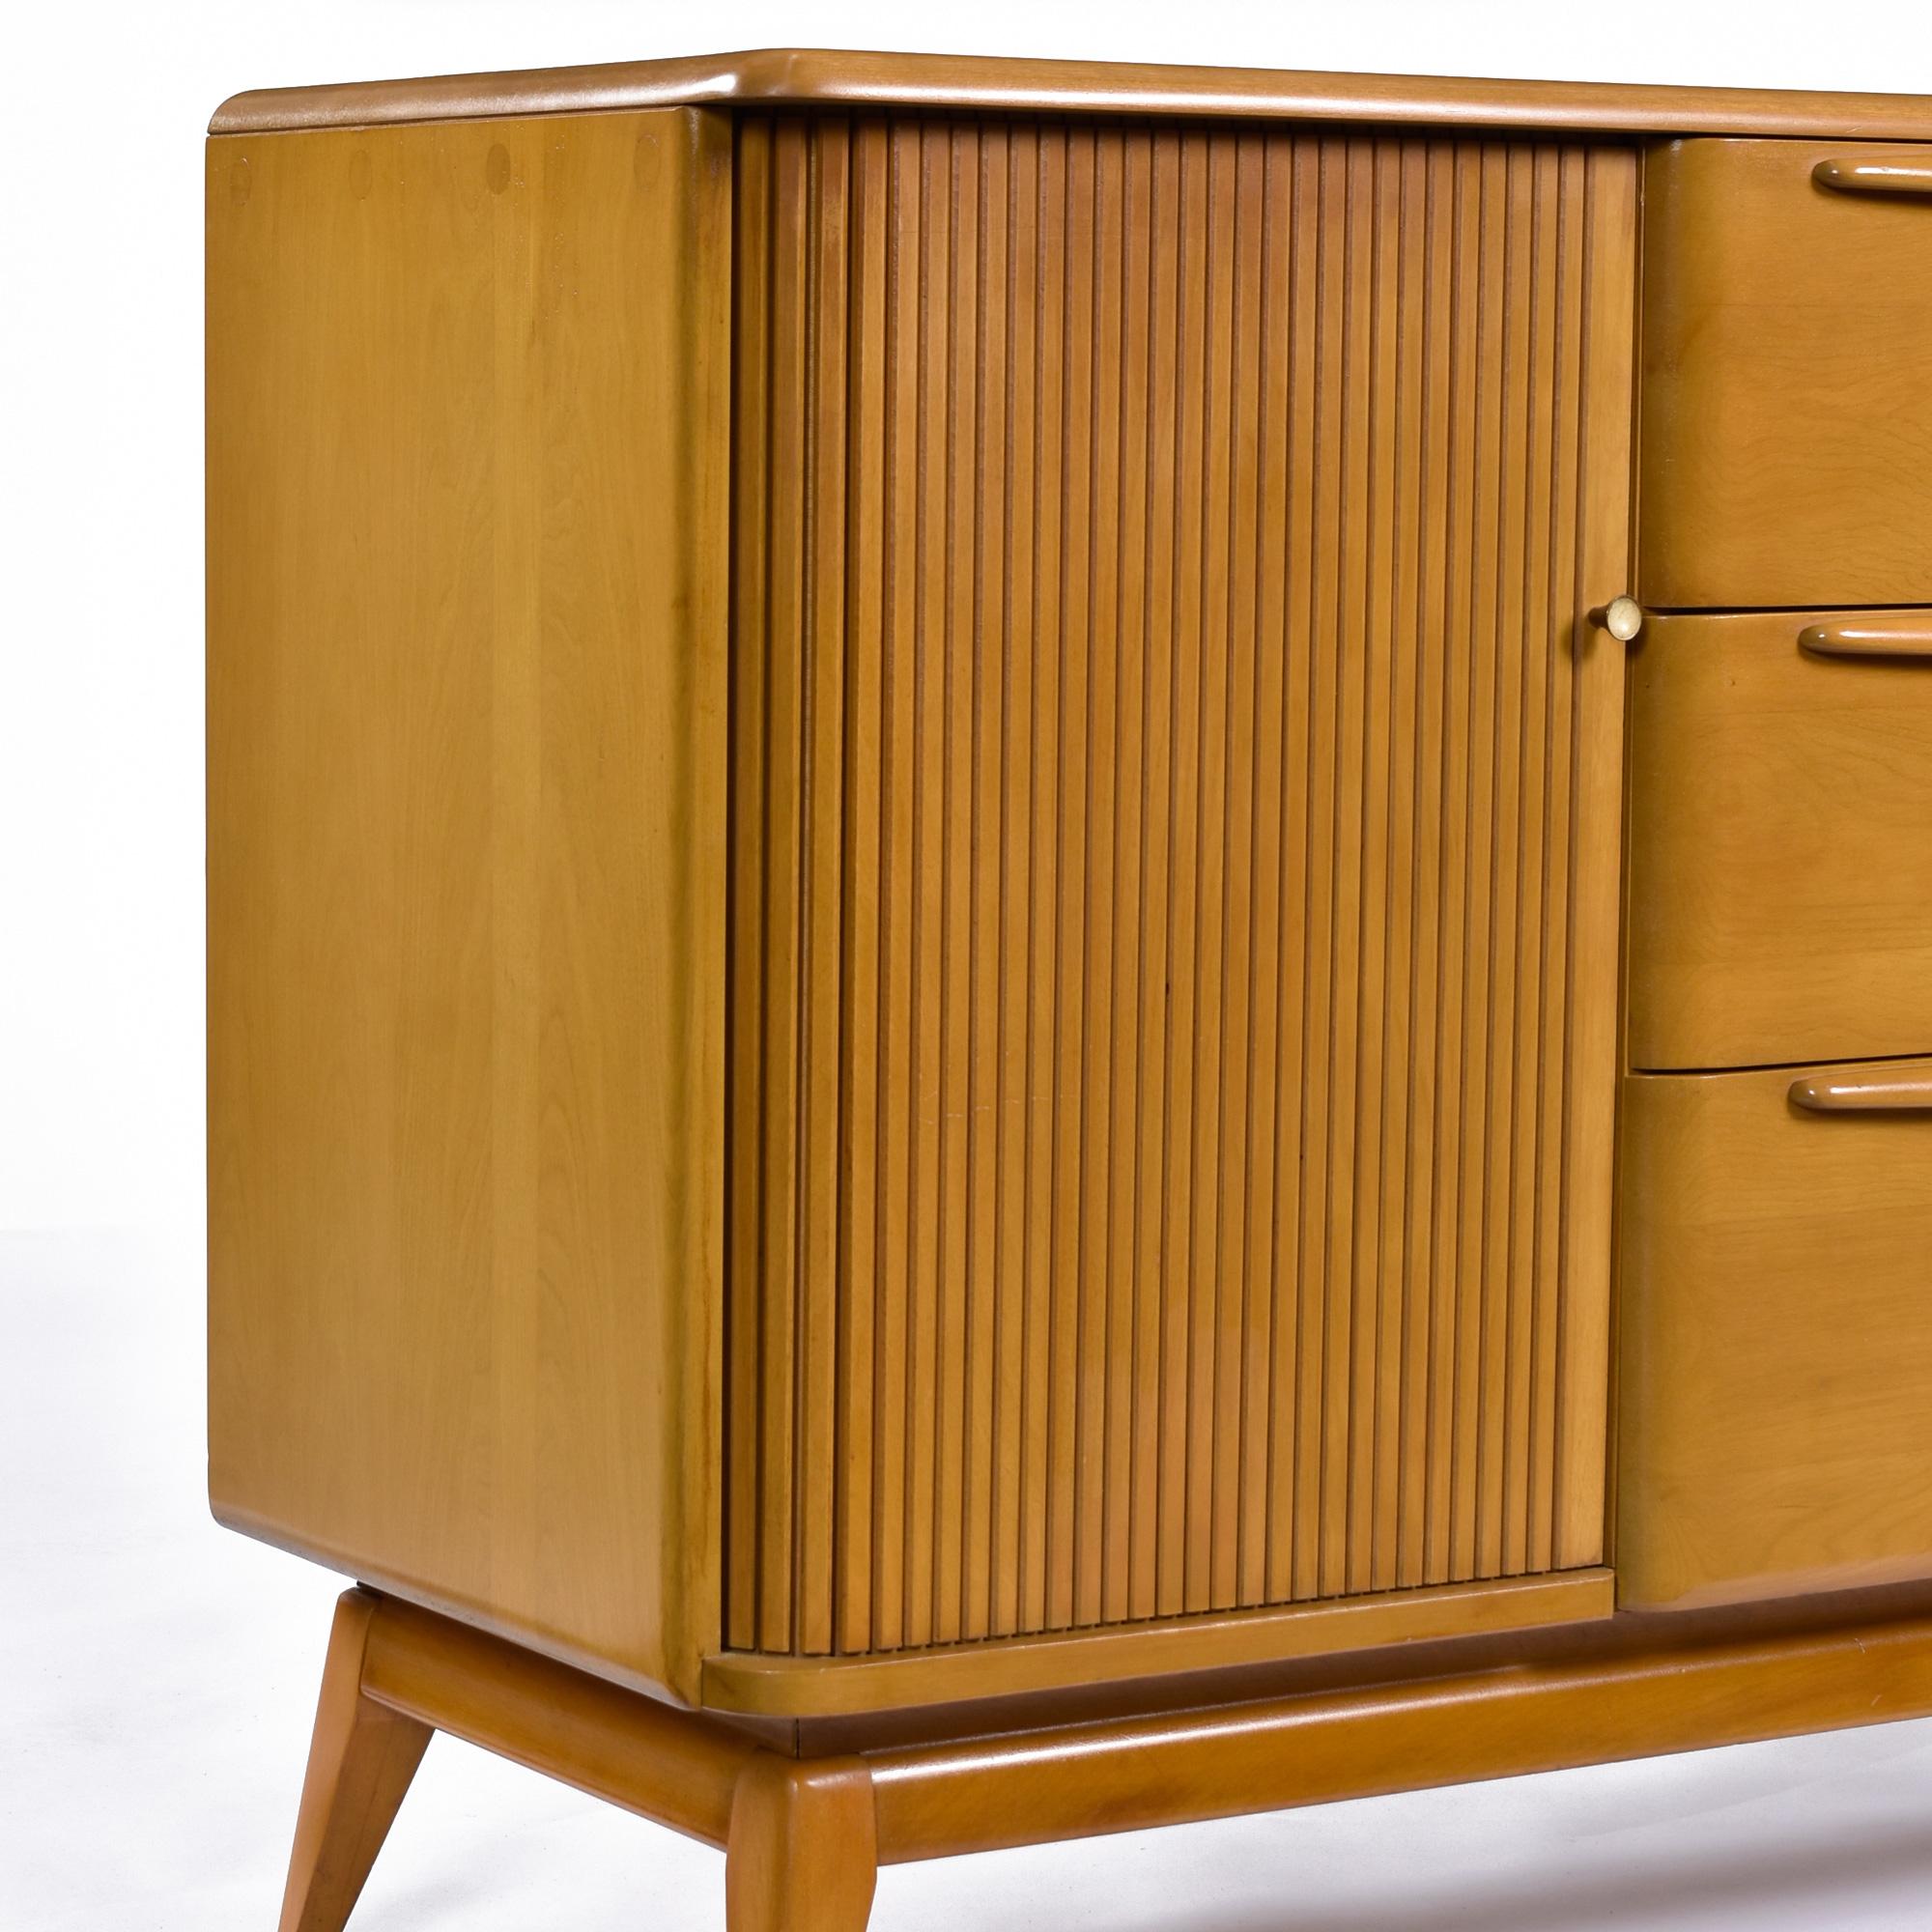 Vintage Restored Solid Maple Heywood Wakefield M-1542 Wheat Tambour Credenza In Good Condition For Sale In Chattanooga, TN